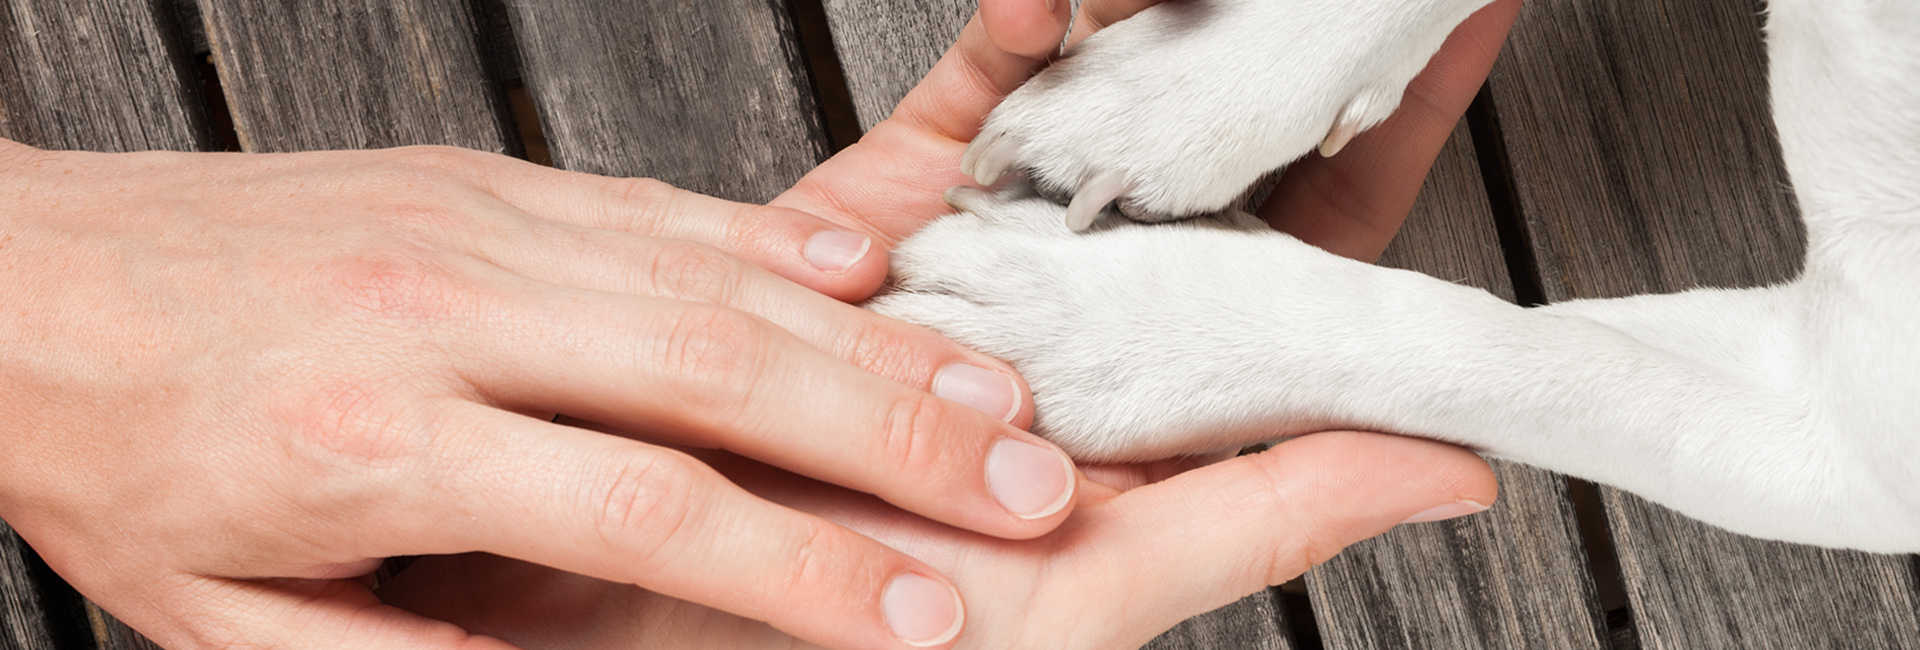 Owners Hand Holding Dog Paws